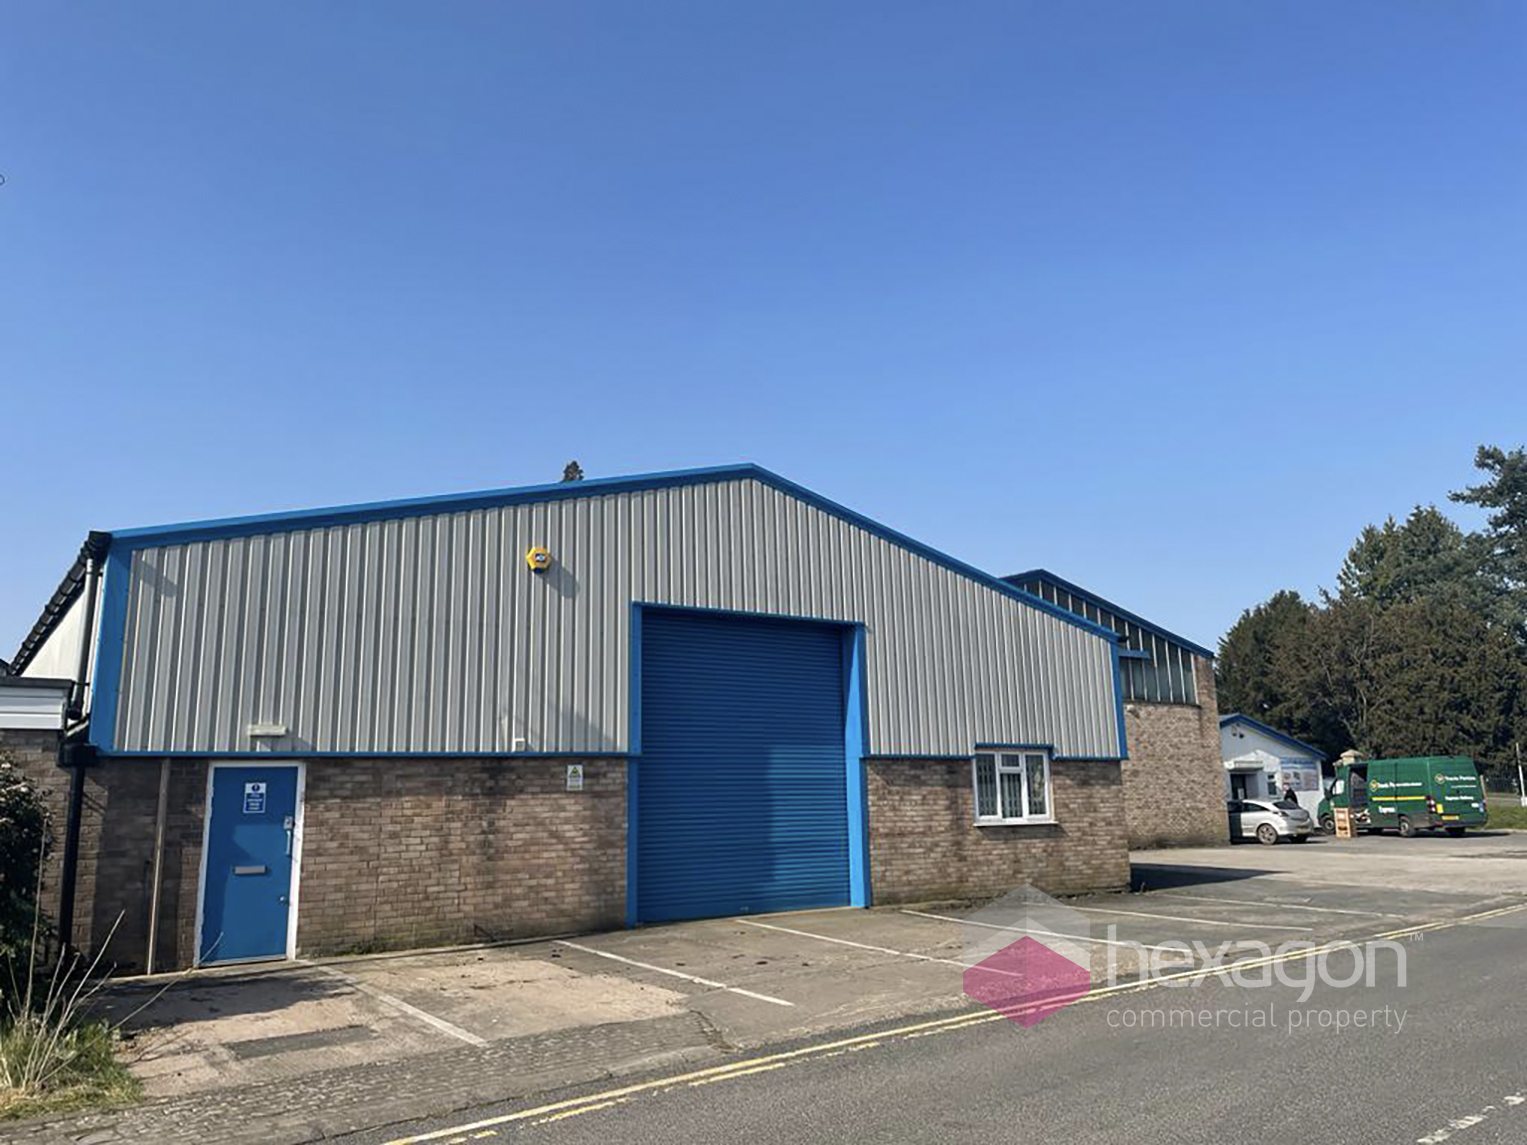 Light Industrial for rent in Bromyard. From Hexagon Commercial Property